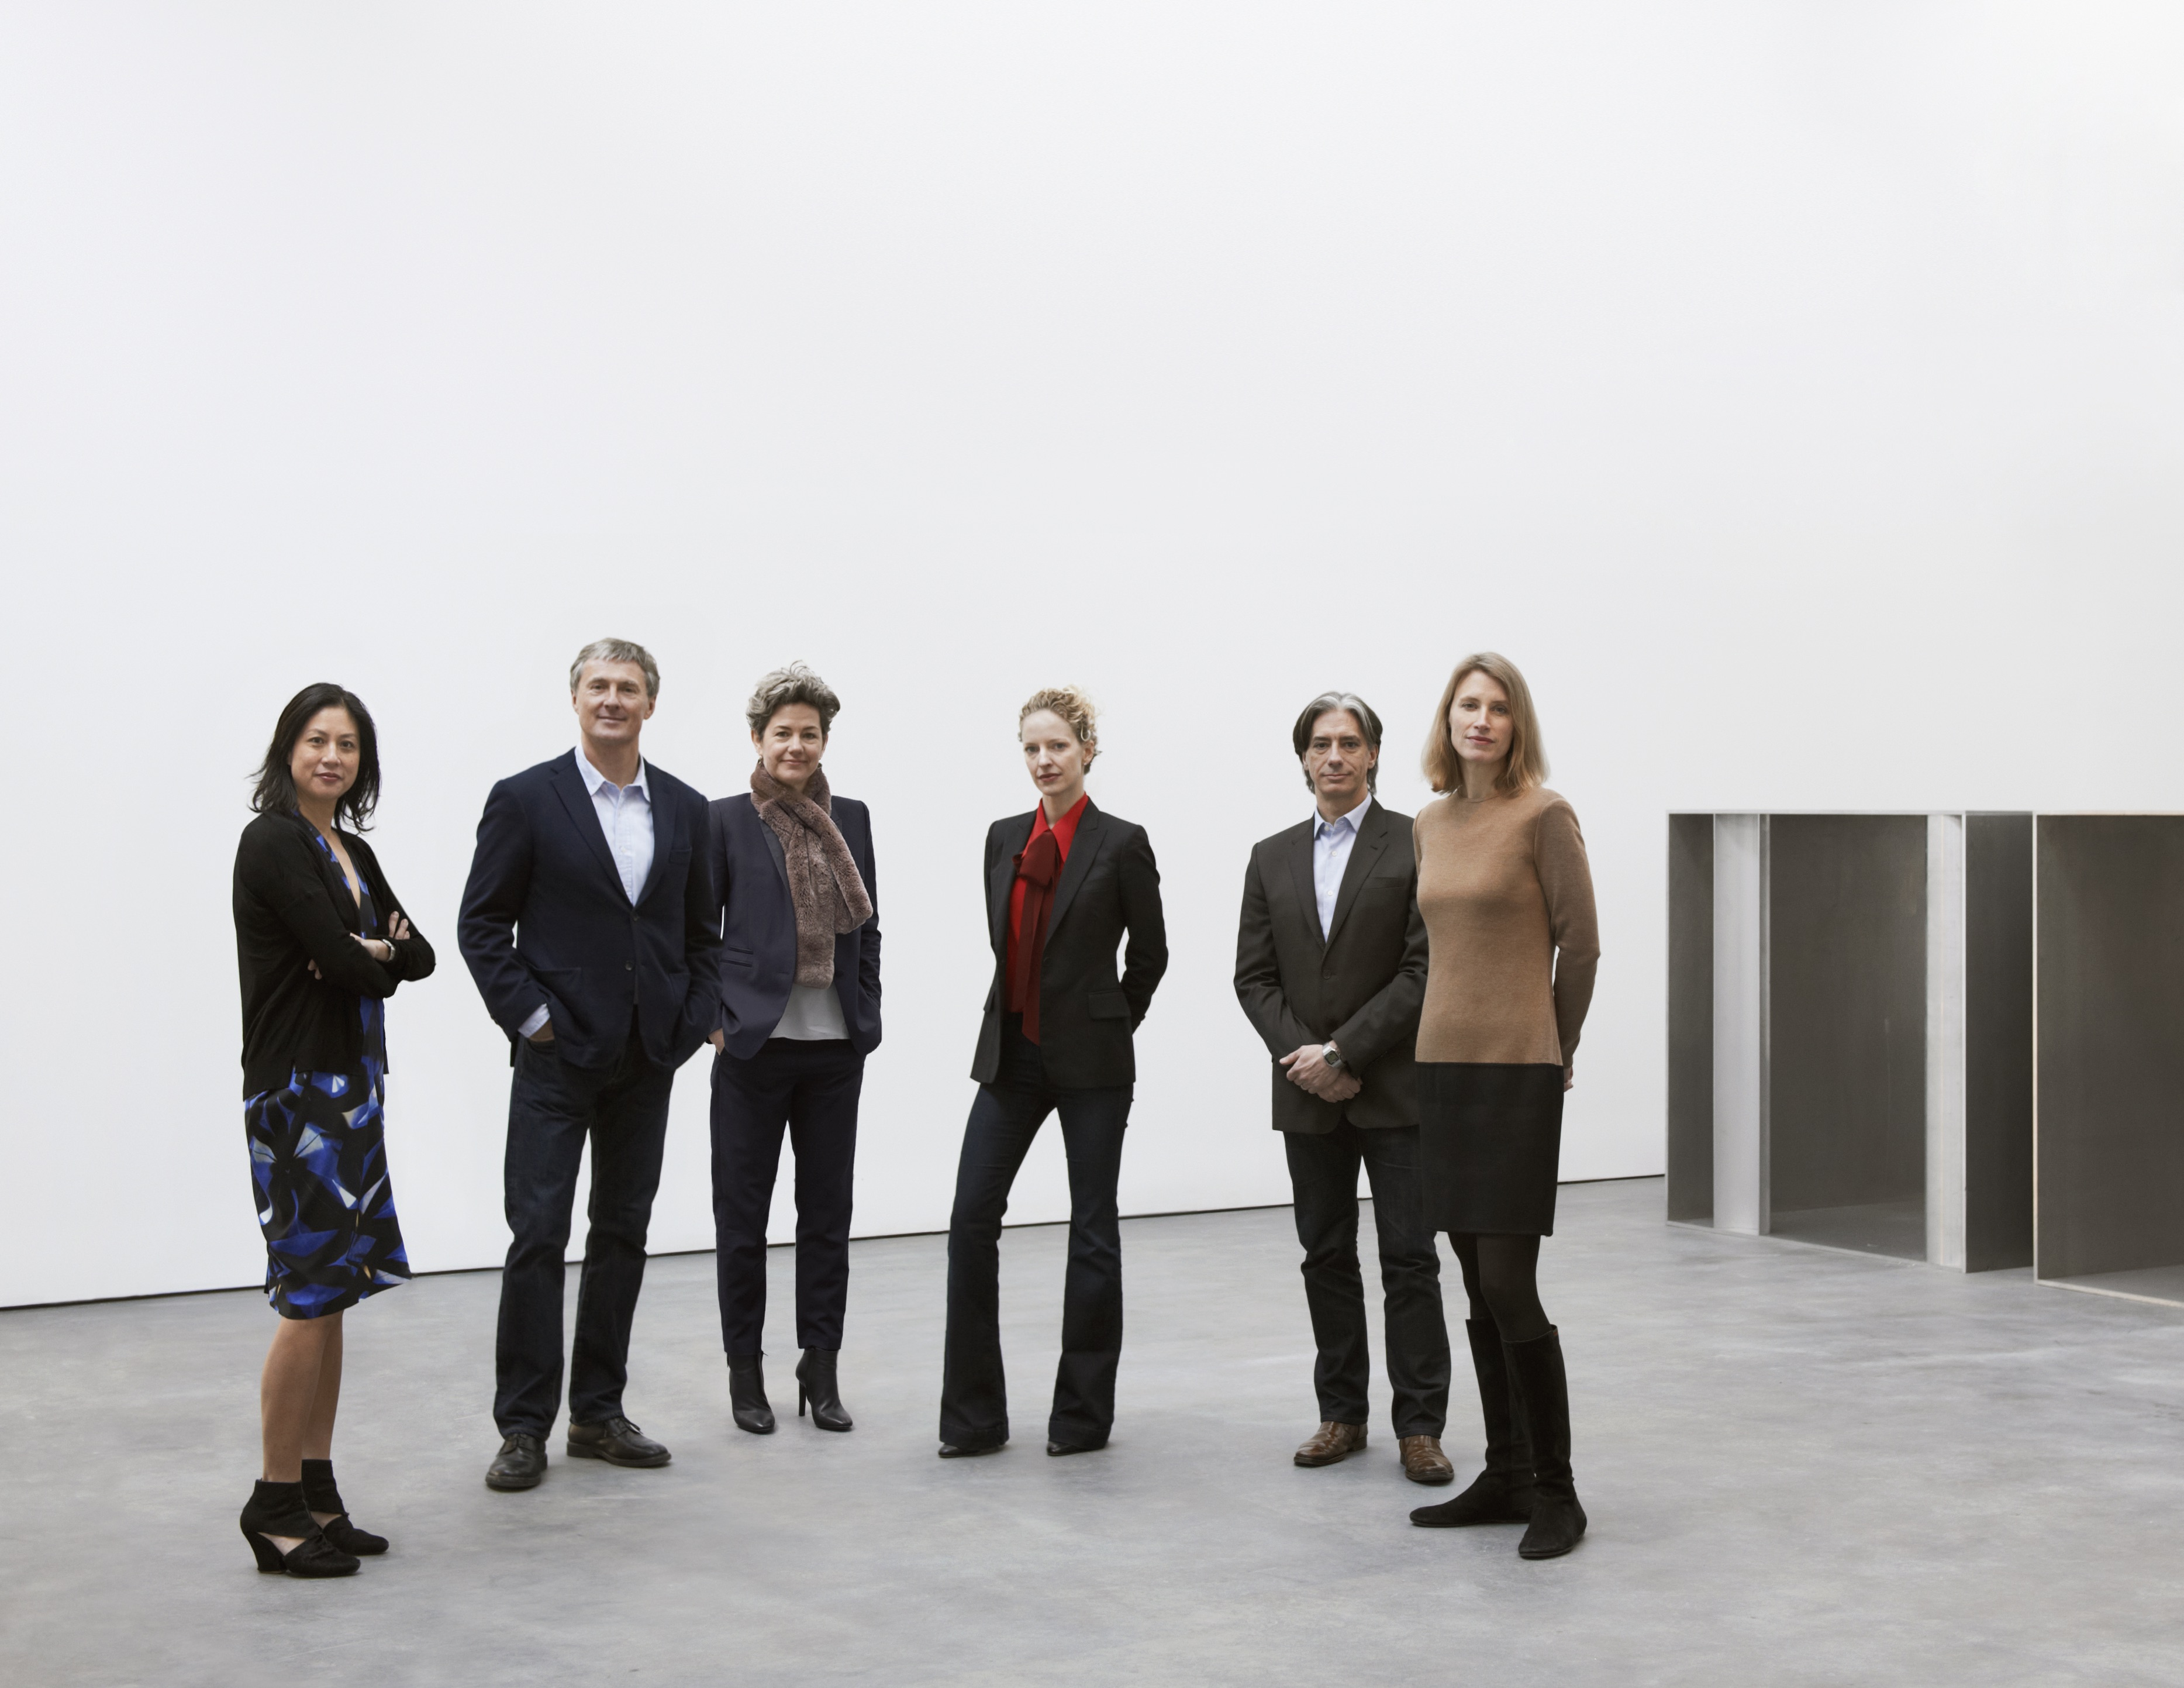  Snapshot of the extended Zwirner family, from left: Angela Choon (London) David Zwirner Bellatrix Hubert (West 19th St, NY) Kristine Bell (West 20th St, NY) Christopher D’Amelio (West 20th Street, NY) Hanna Schouwink (West 19th Street, NY). Photo by Jason Schmidt. 